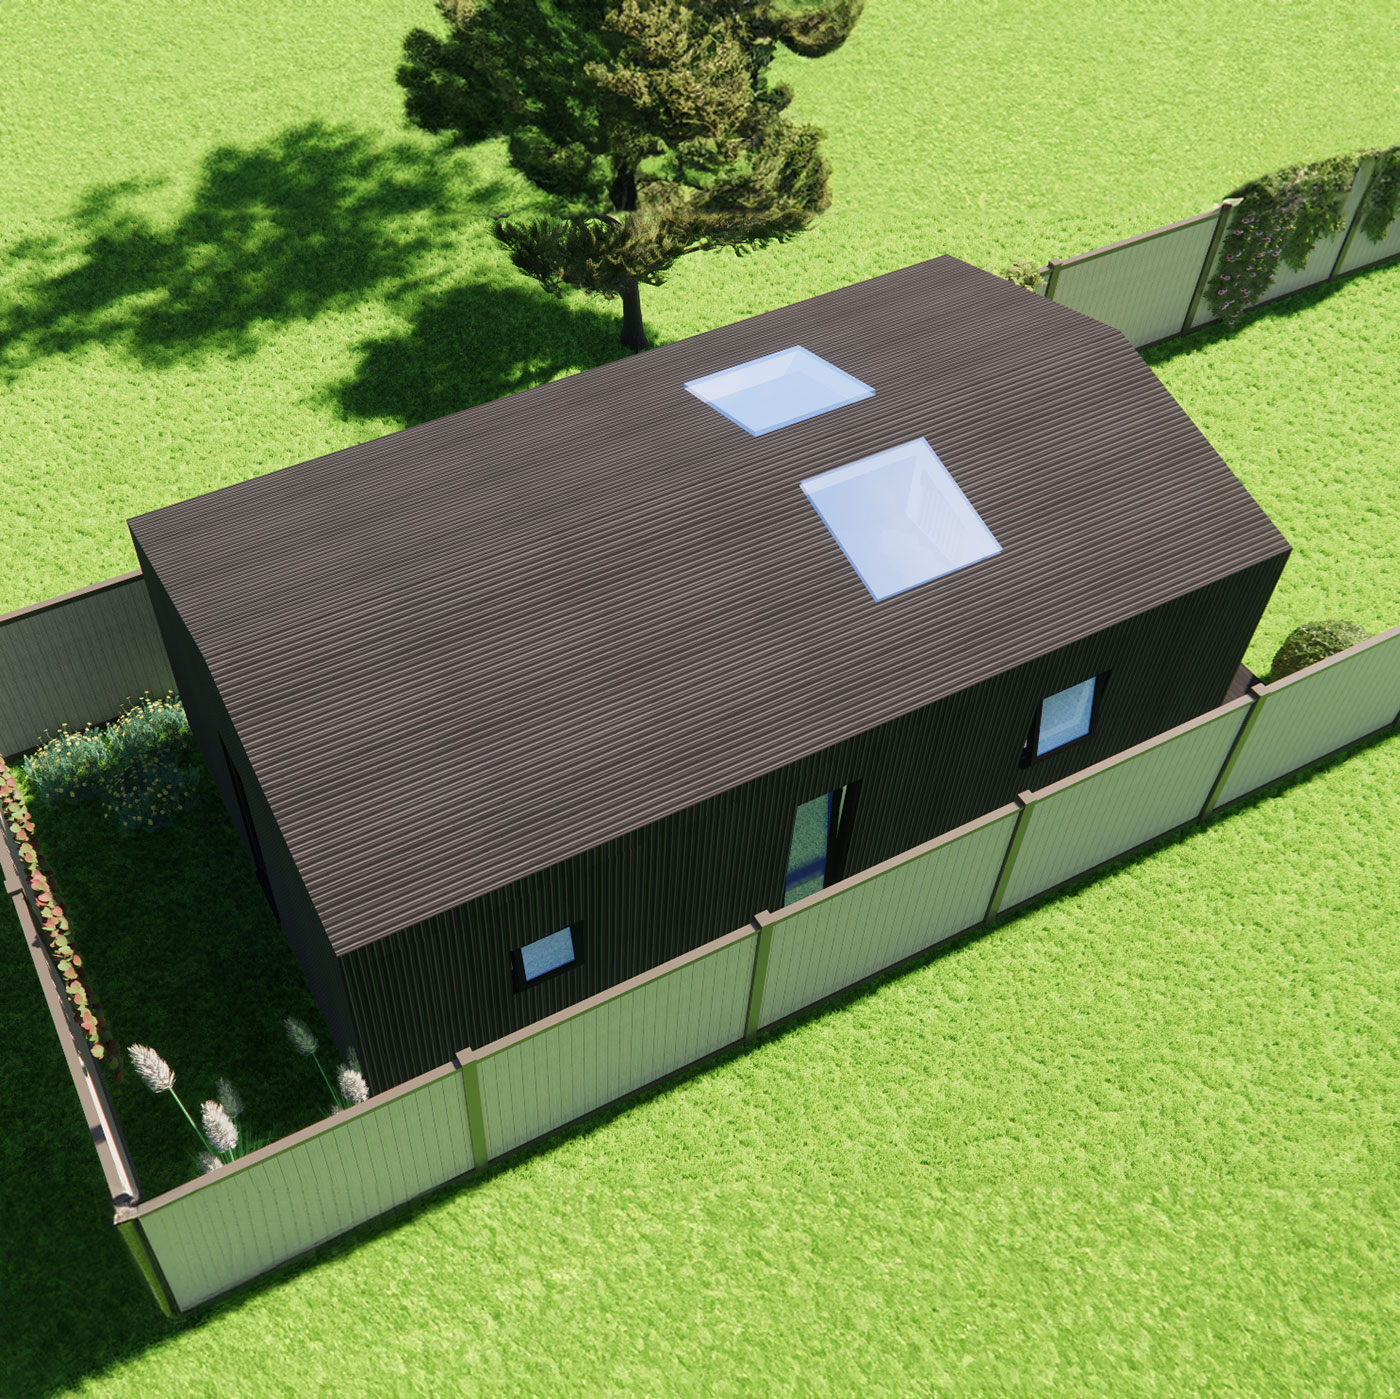 3D Visualisation of mobile home 4.8m by 8.4m